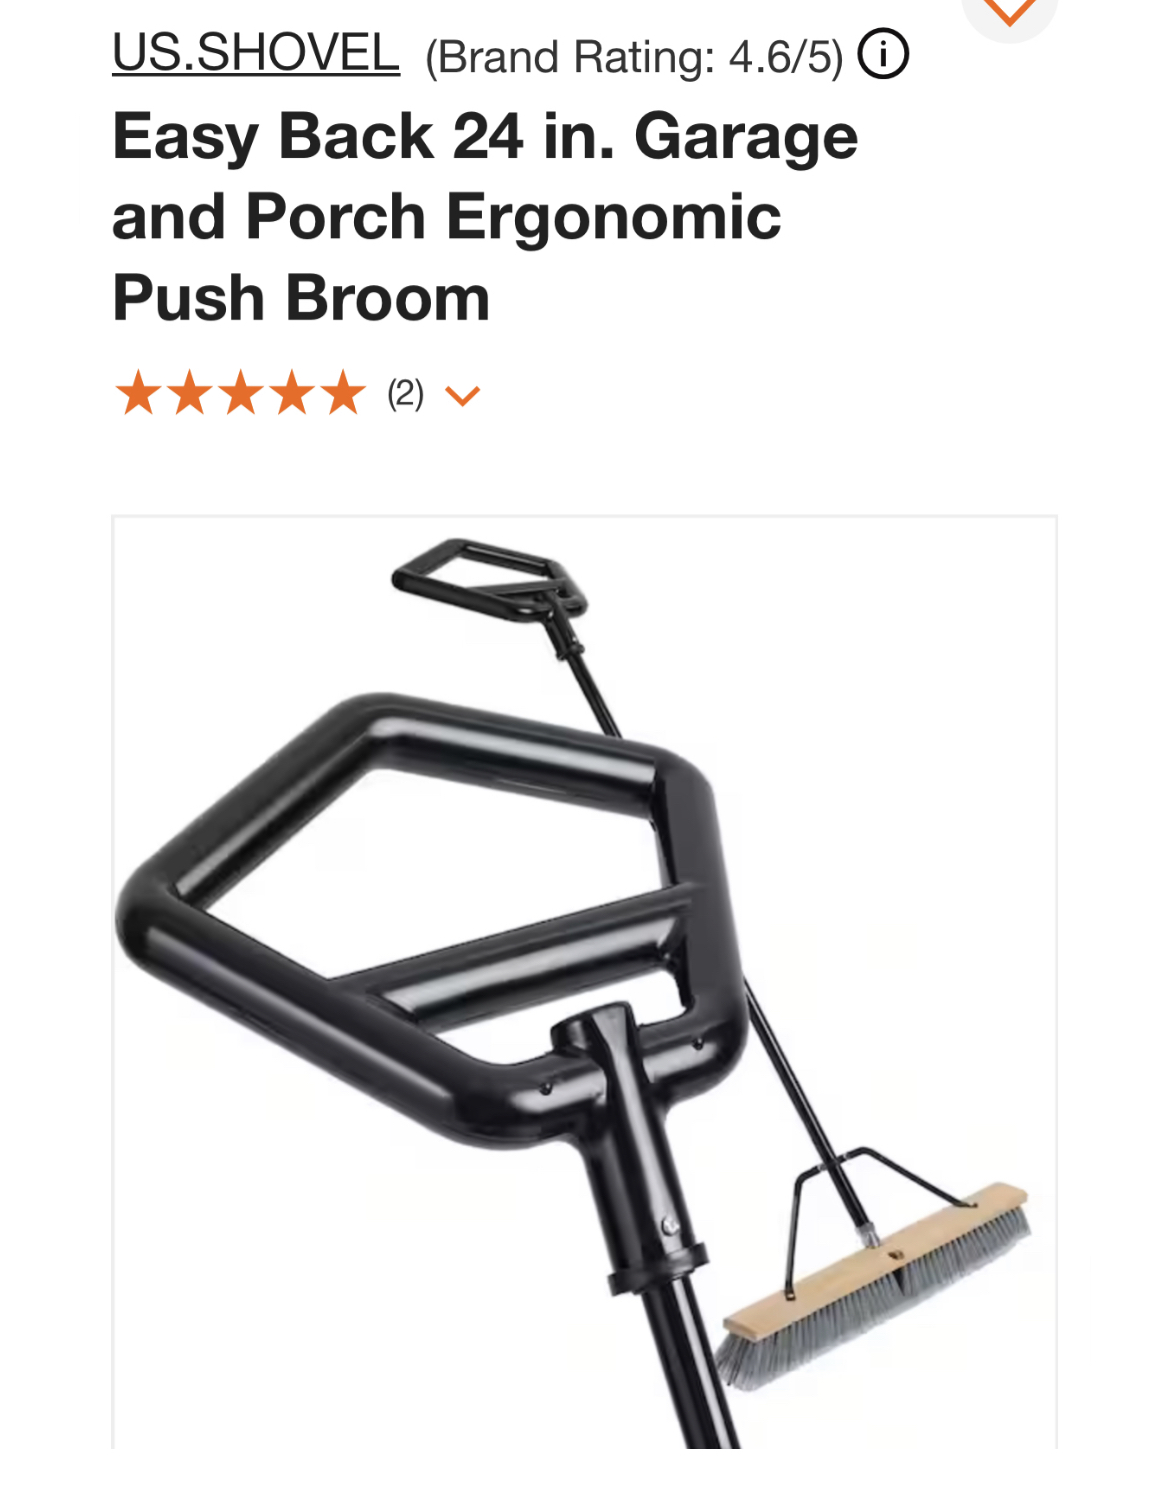 Ergonomic Shop Push Brooms Available at Home Depot 